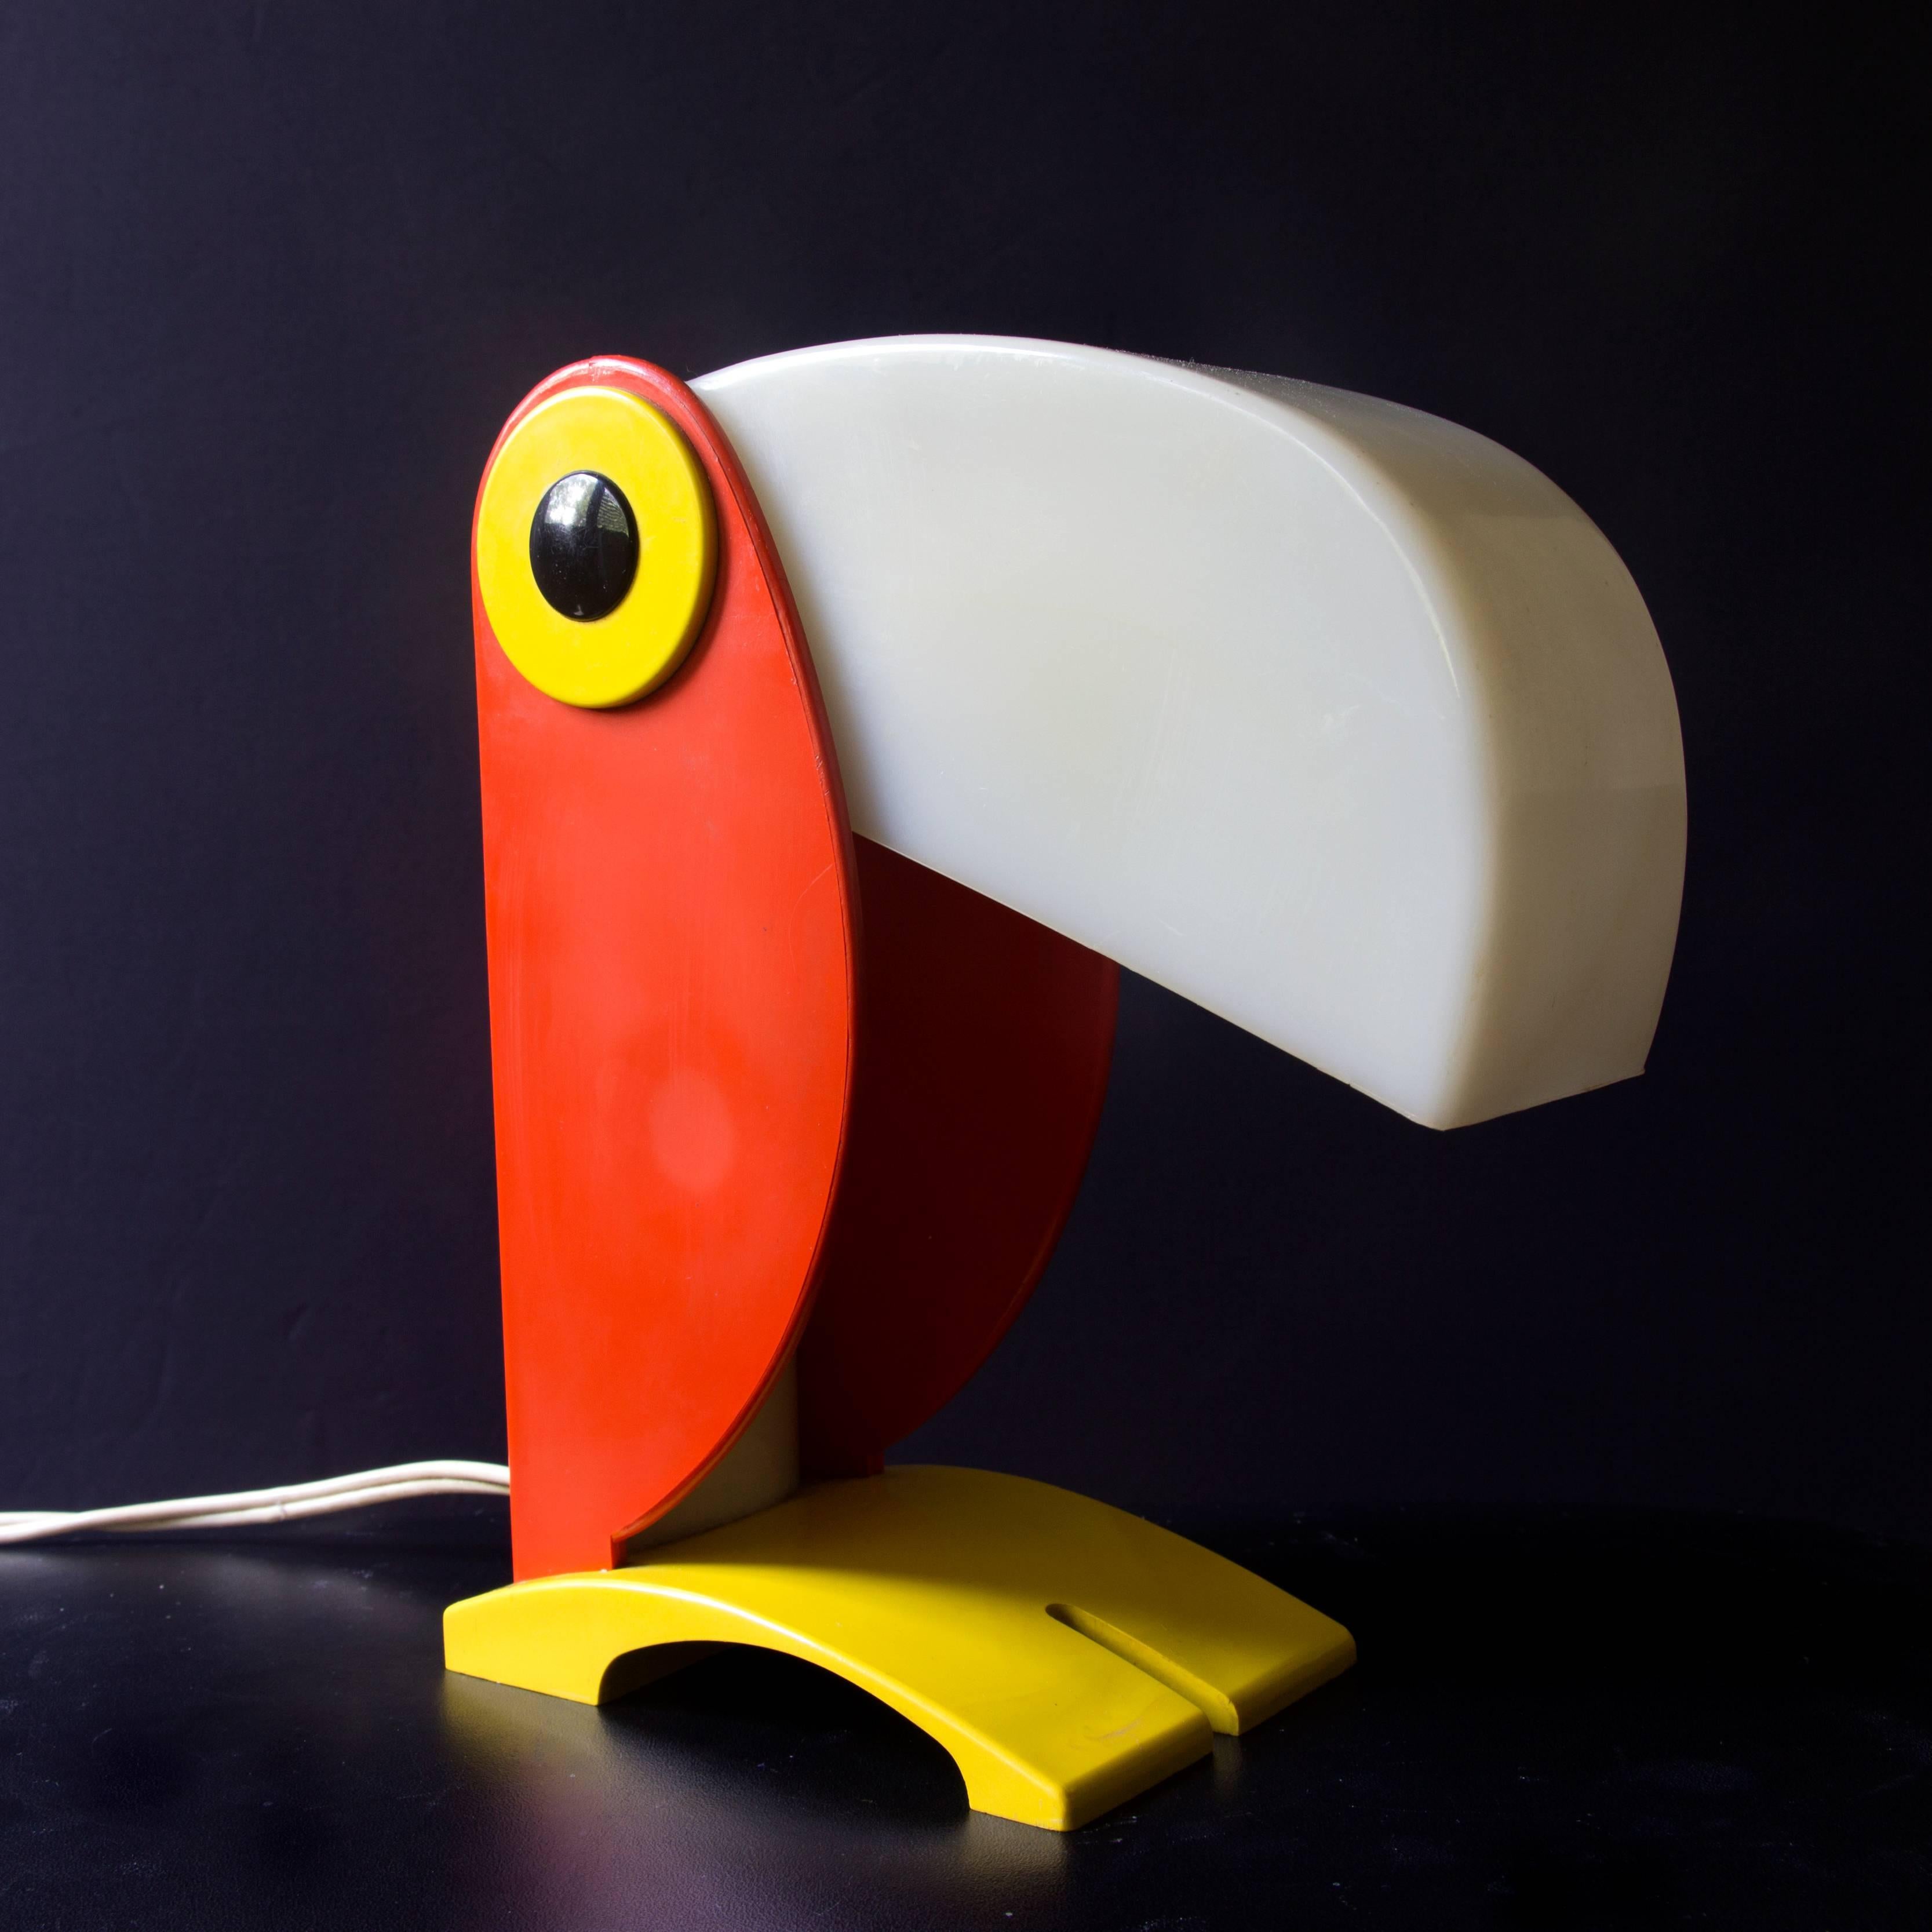 A charming table lamp displaying a toucan or parrot bird from the 1970s. Made of orange, yellow and white plastic. For OTF, Verona, Italy. Has an adjustable lampshade. 

Toucan childrens table lamp by Oldtimer Ferrari, Verona Italy, 1968.
Very